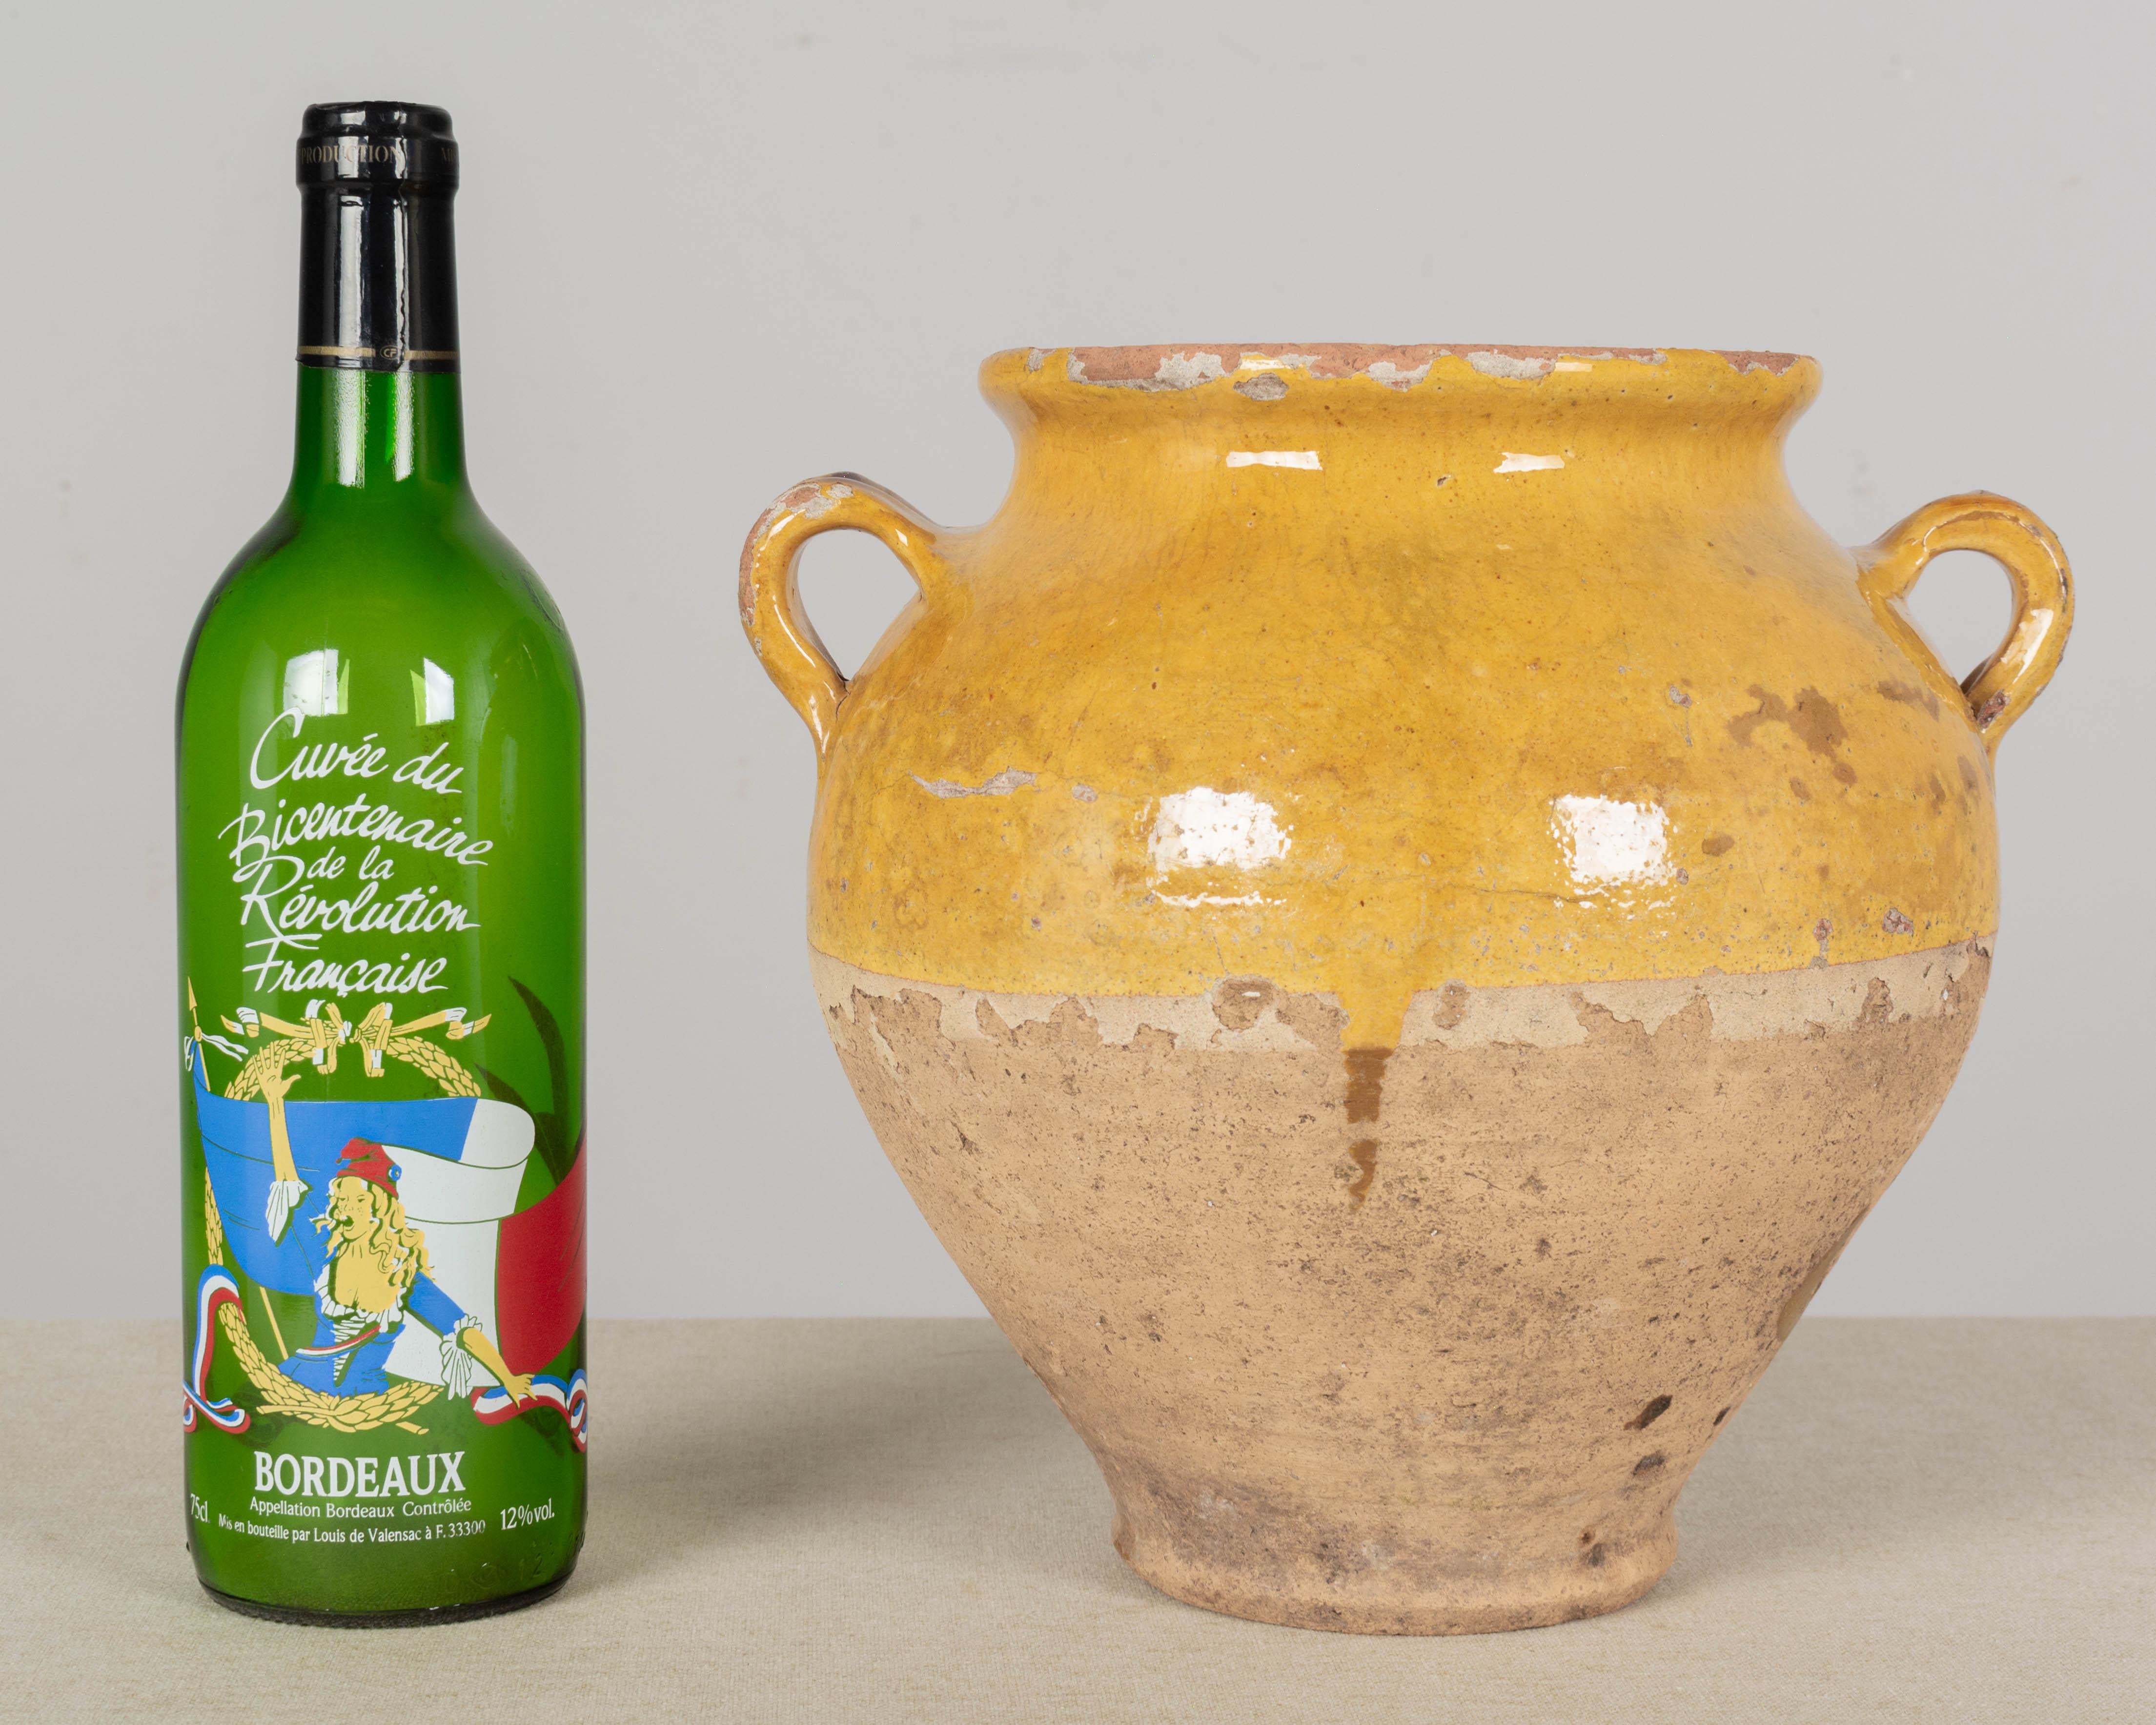 An earthenware confit pot from the Southwest of France with traditional yellow glaze. Some chips and losses to glaze. These ordinary earthenware vessels were once used daily in the French country home and have beautiful rustic glazes of green, ochre